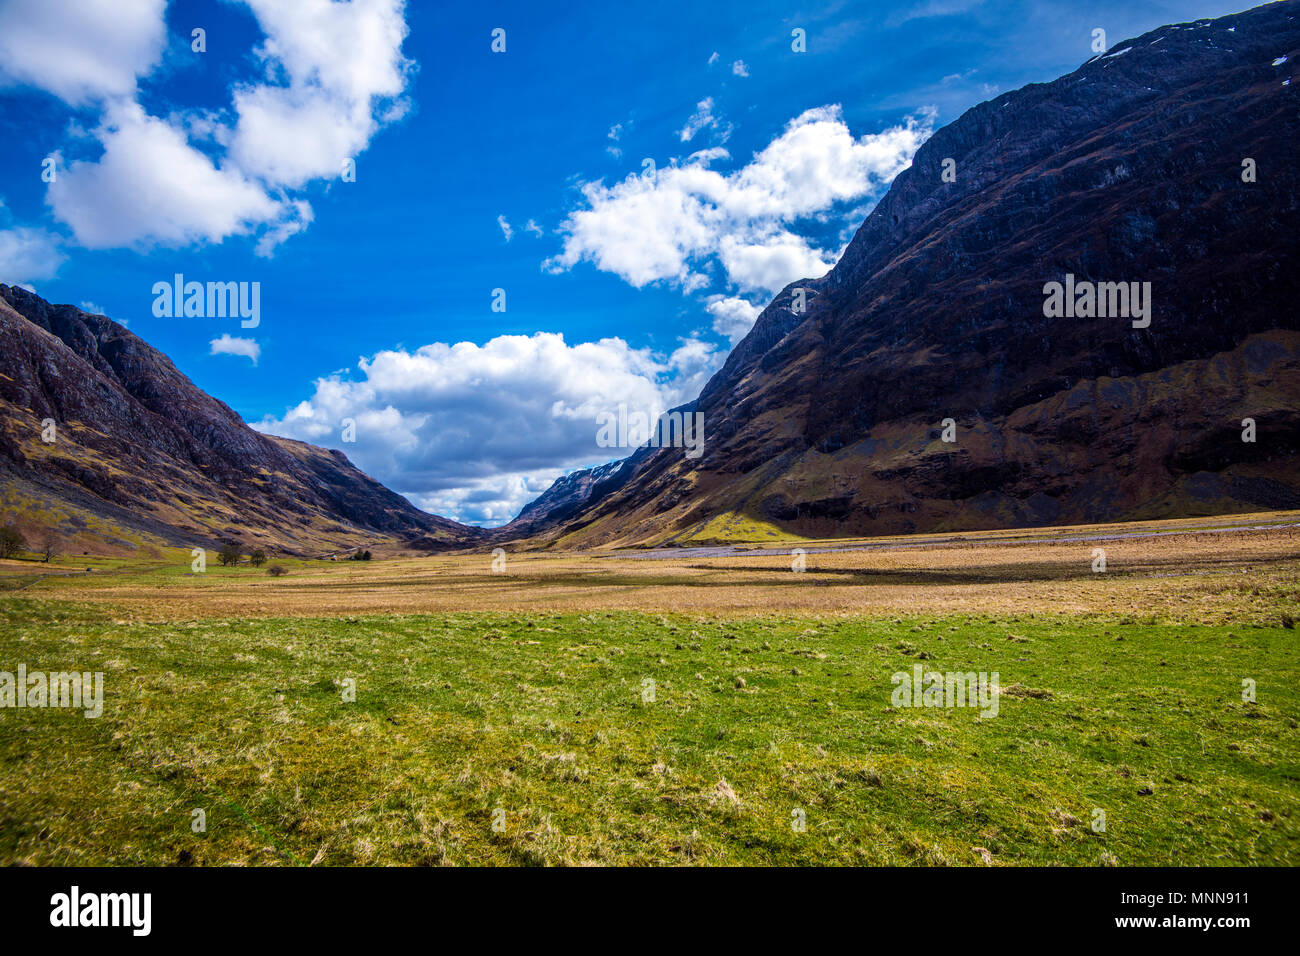 The 'U'-shaped valley of Glen Coe in the Highlands of Scotland shows its history of glaciation and previous volcanic development. Stock Photo